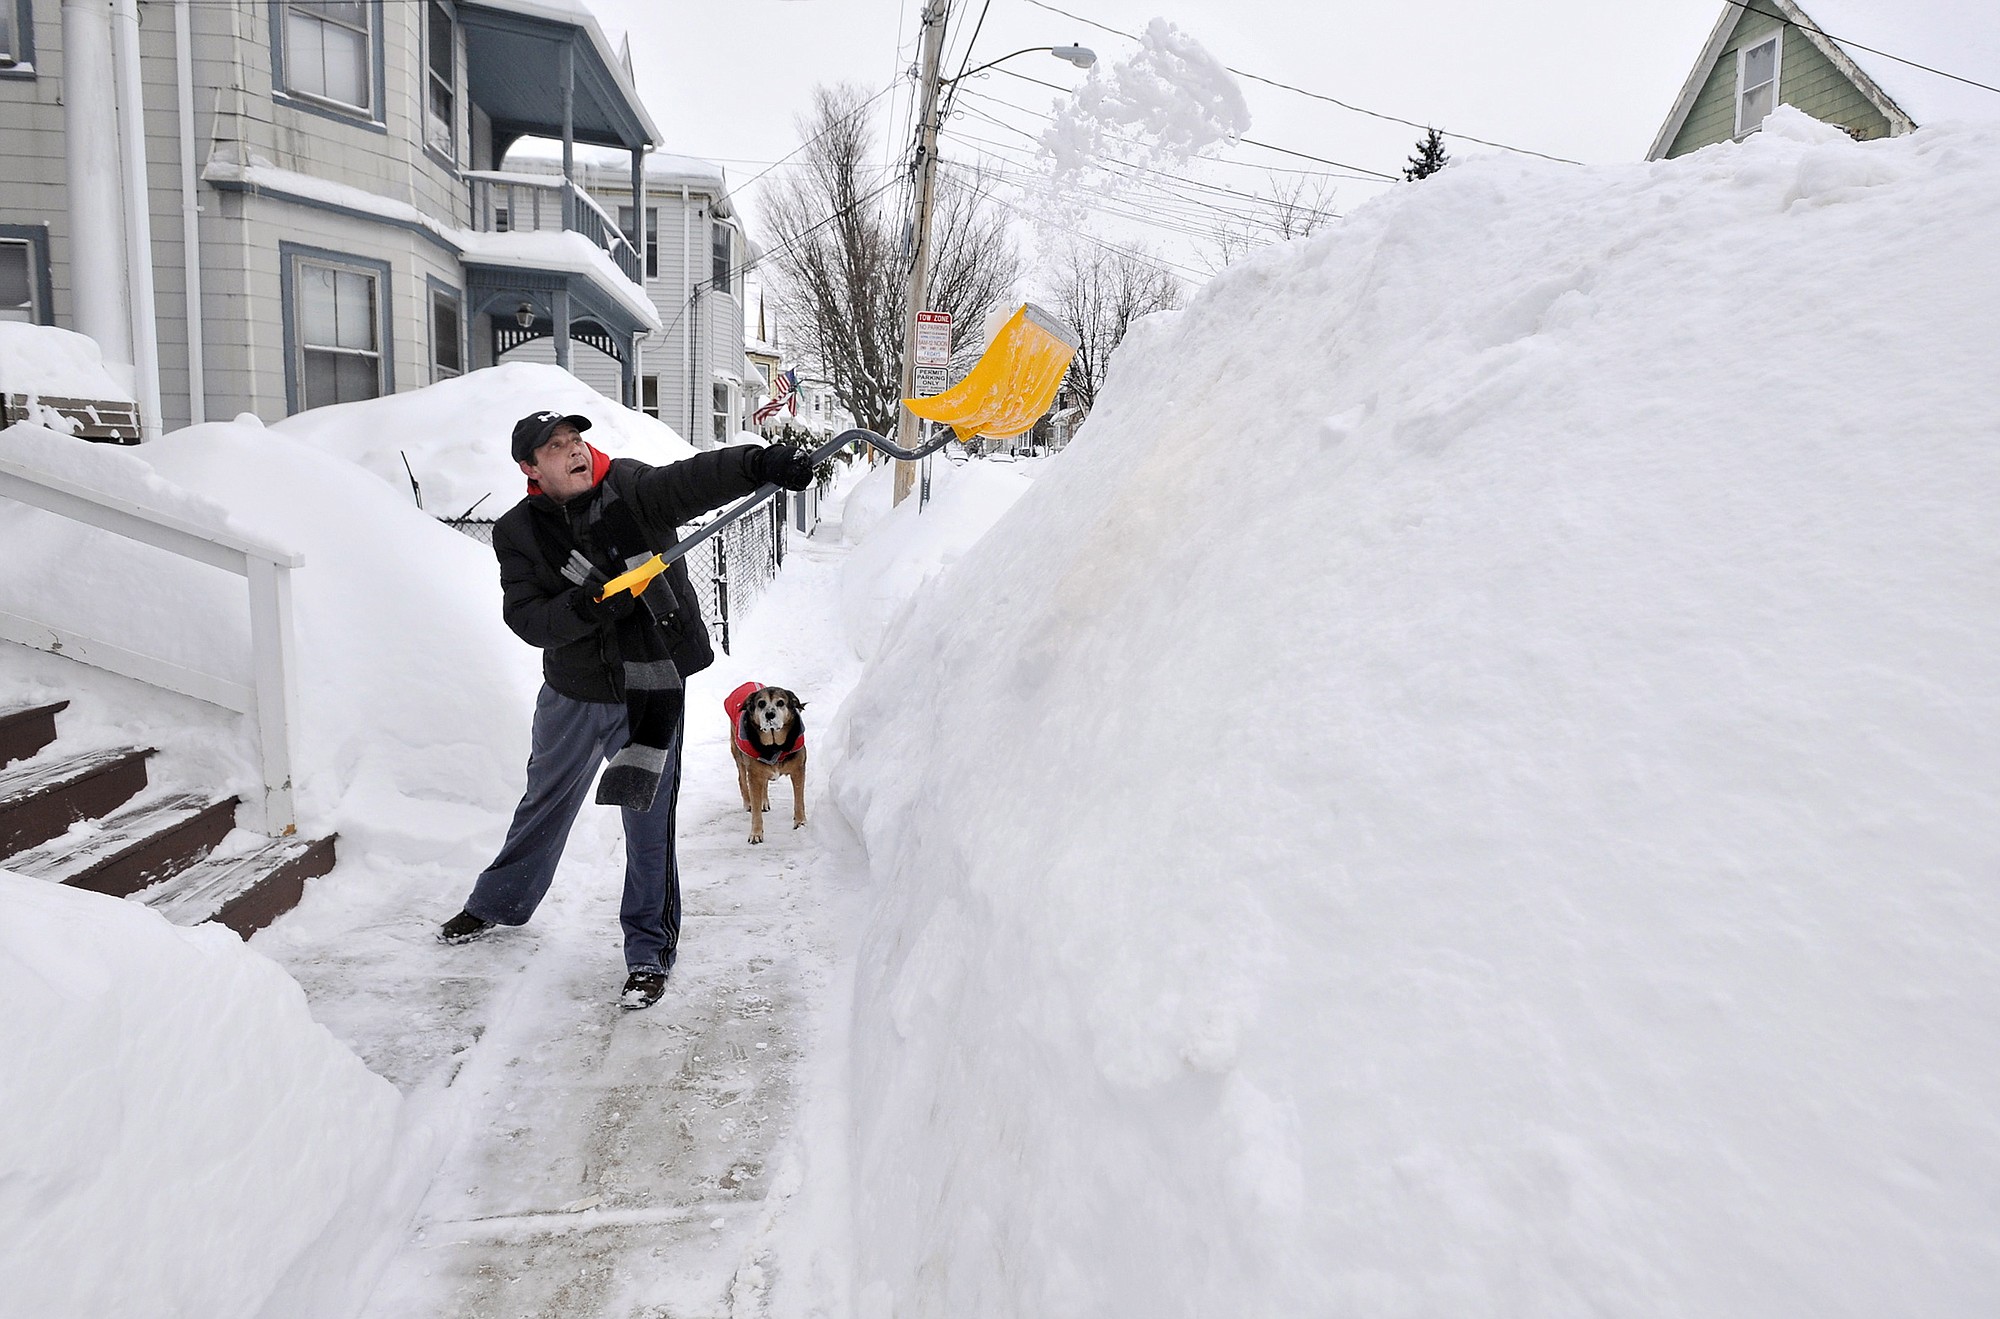 Lee Anderson adds to the pile of snow beside the sidewalk in front of his house in Somerville, Mass.